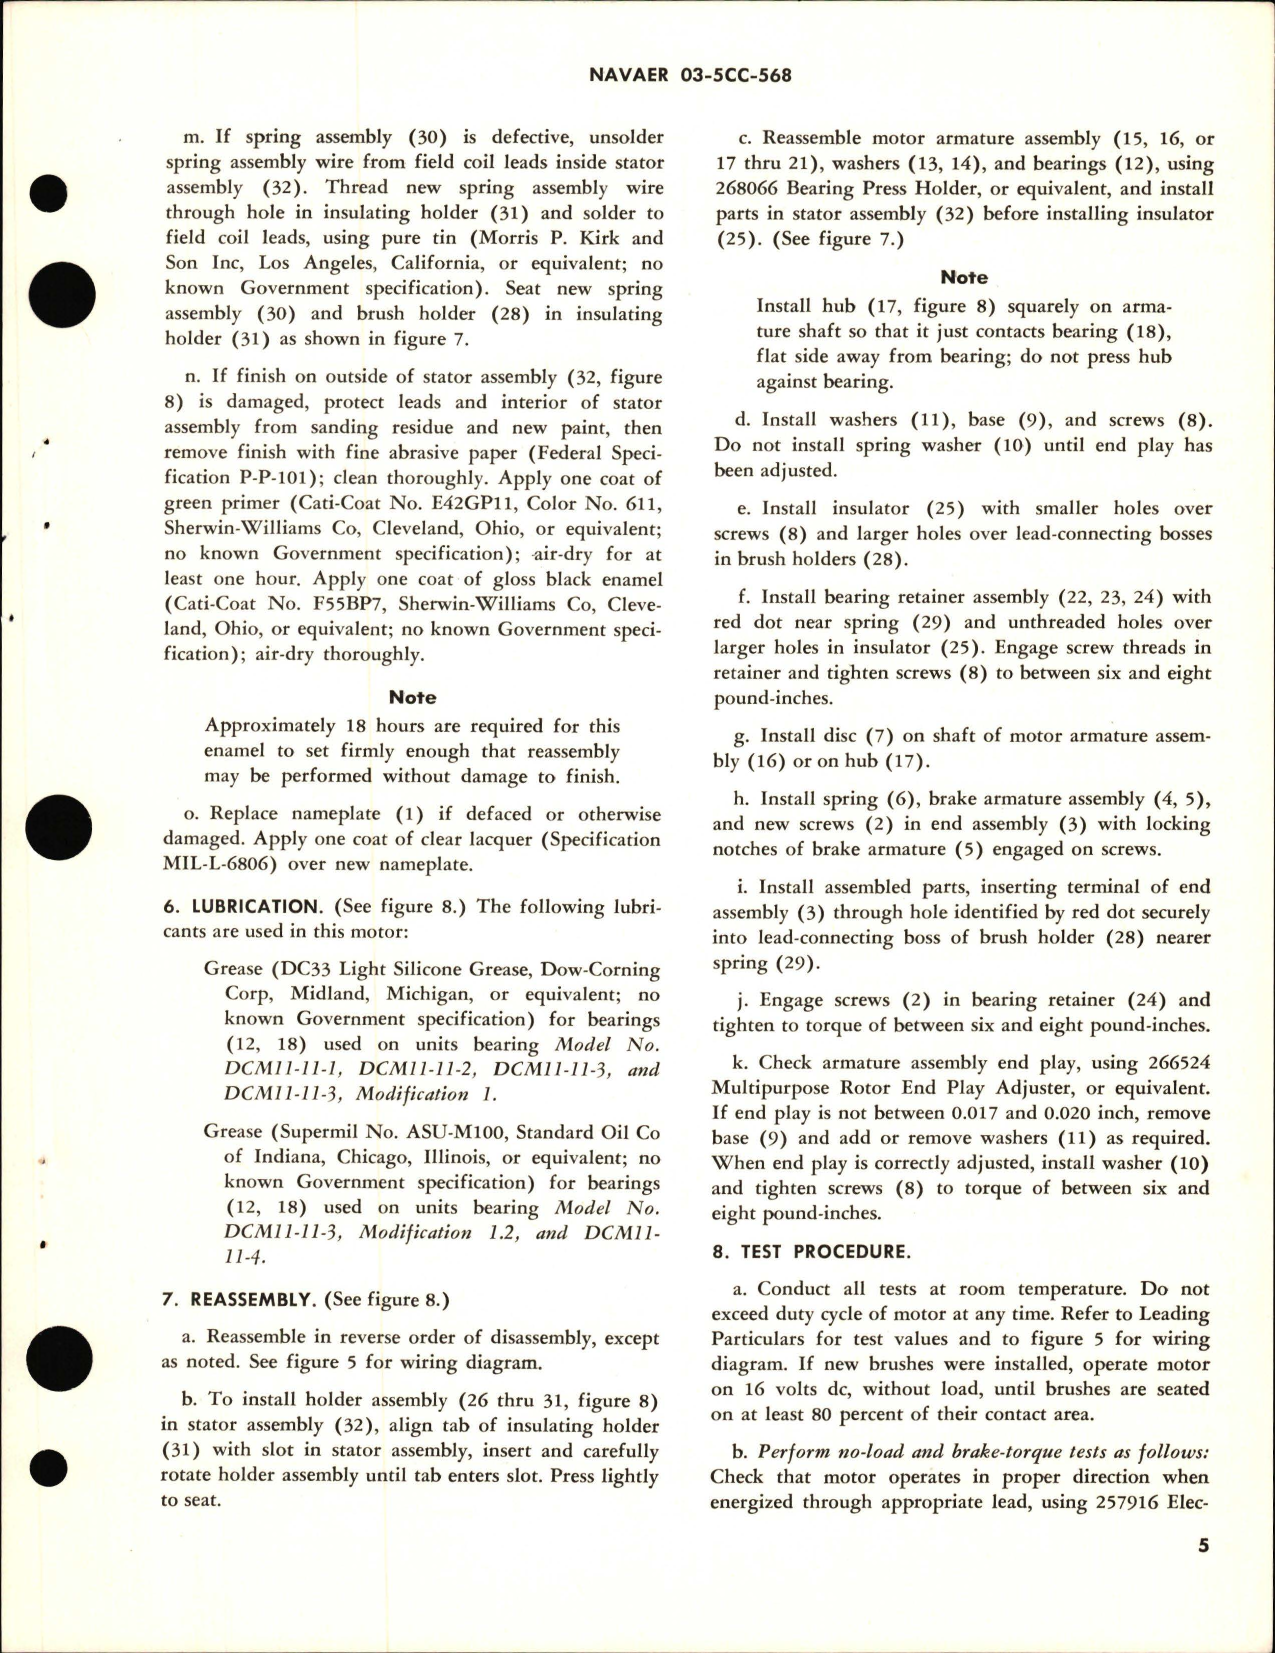 Sample page 5 from AirCorps Library document: Overhaul Instructions with Parts Breakdown for Motor, Aircraft Direct Current - Part 36848 